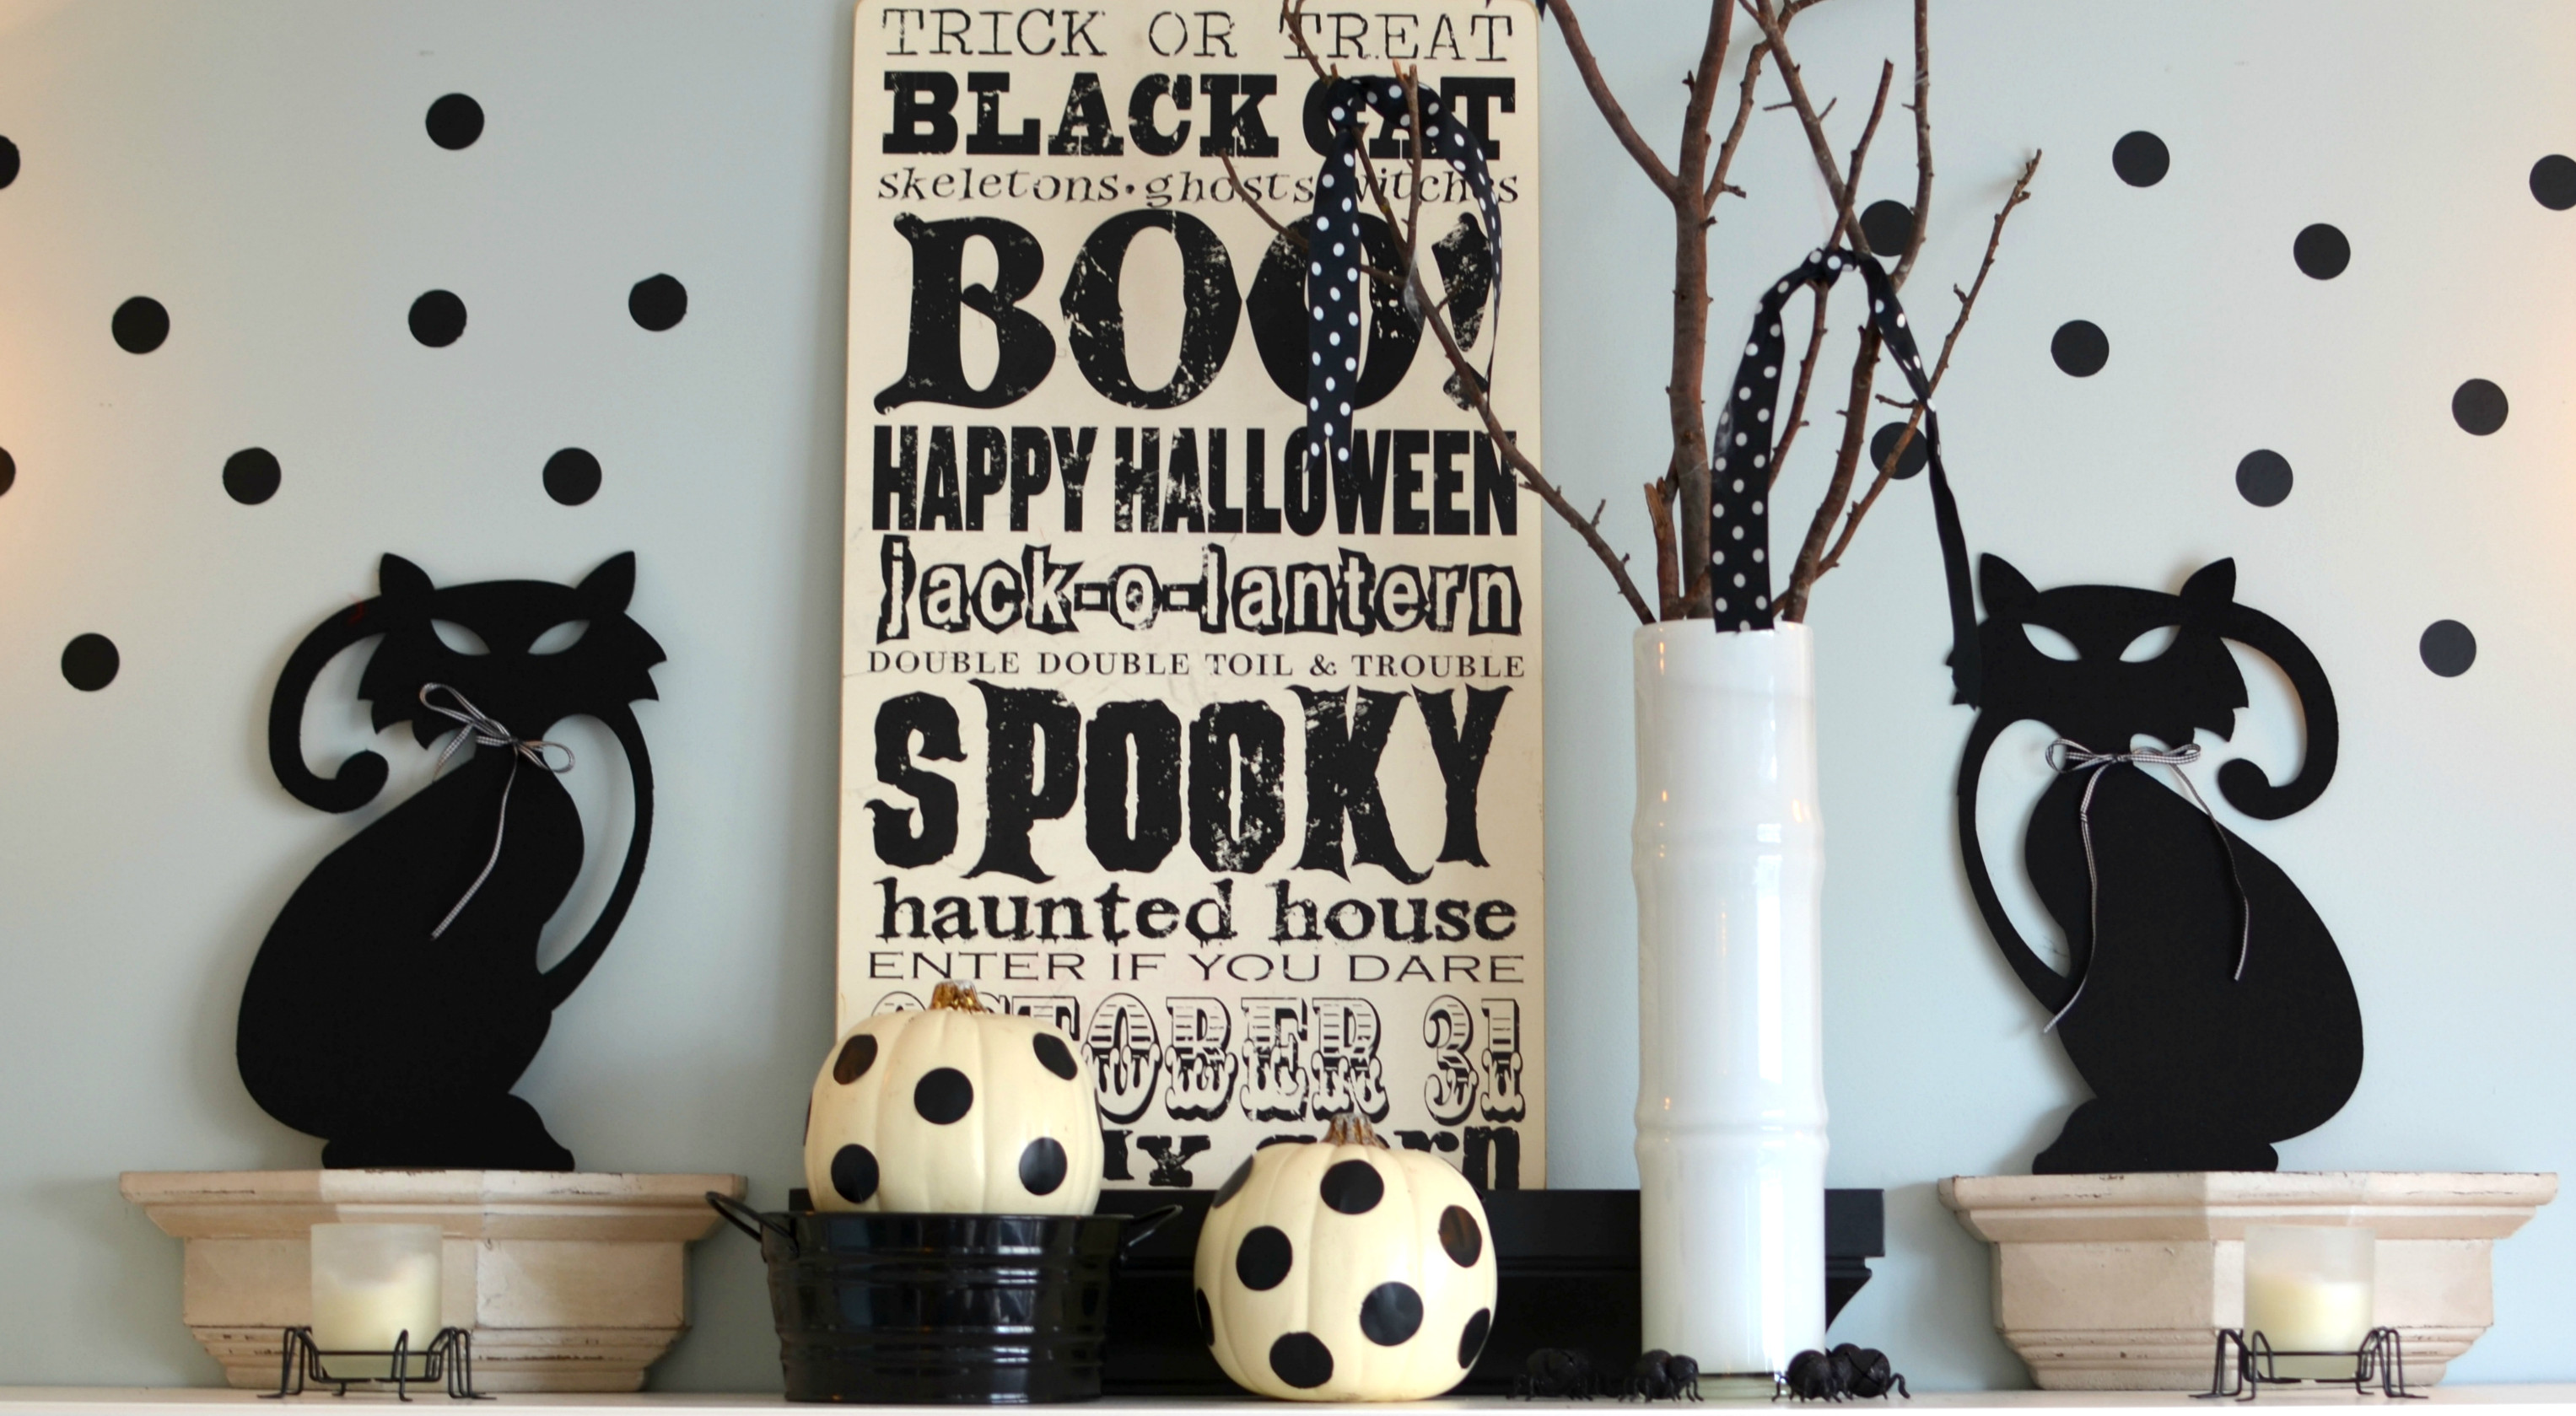 Halloween Decorating: Black & White with Polka Dots